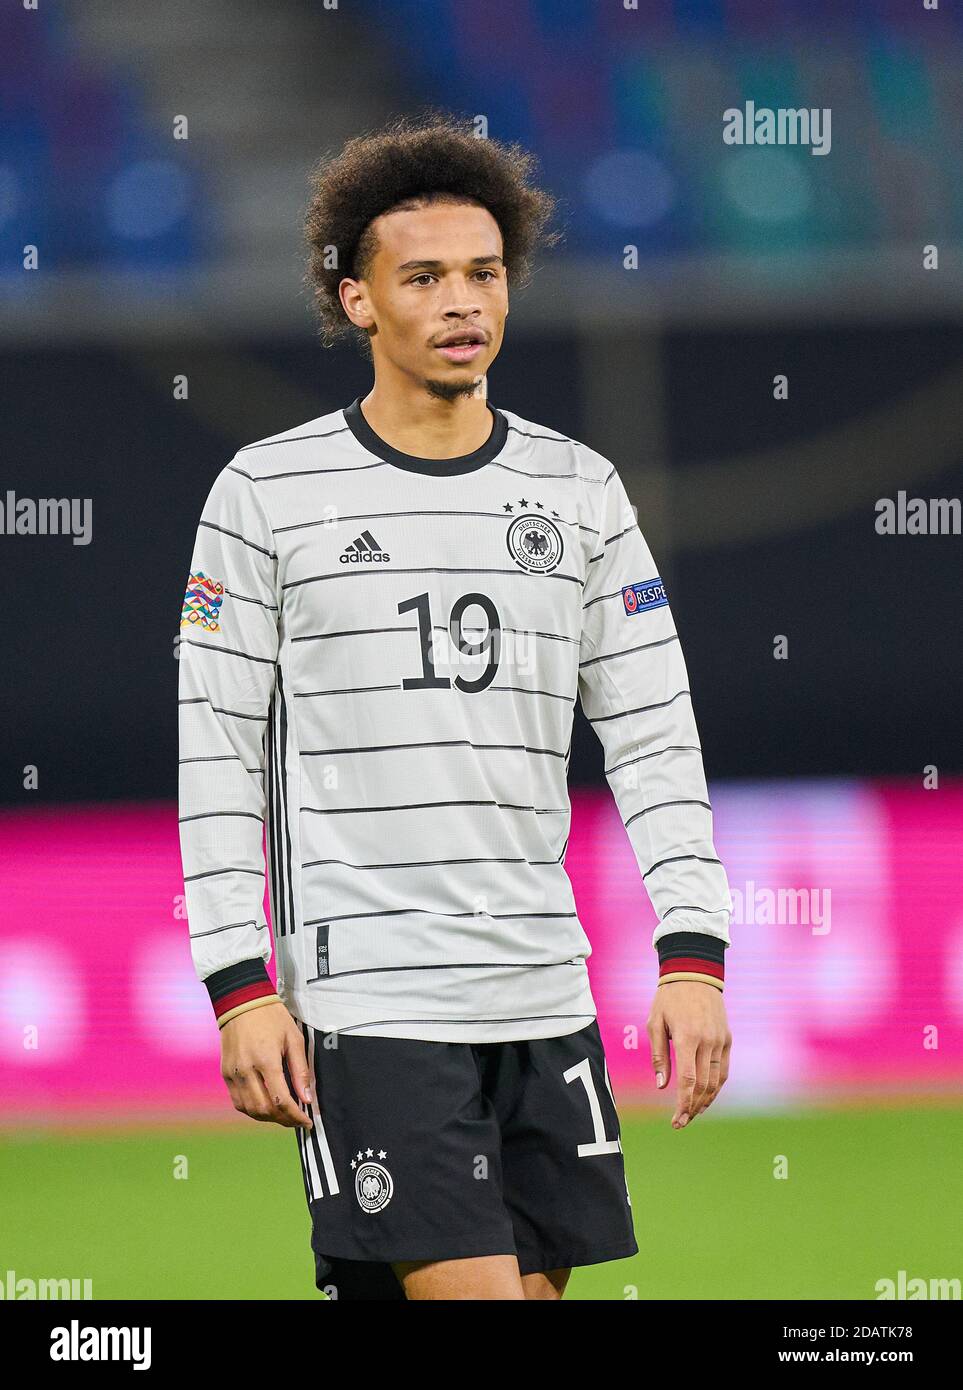 Leroy SANE, DFB 19  half-size, portrait, one person, single, Aktion, Einzelbild, angeschnittenes Einzelmotiv, Halbfigur, halbe Figur,  in the match GERMANY - UKRAINE 3-1 UEFA Nations League,  German Football Nationalteam, DFB , Season 2020/2021 in Leipzig, Germany, November 14, 2020 © Peter Schatz / Alamy Live News   Important: DFB regulations prohibit any use of photographs as image sequences and/or quasi-video. Stock Photo